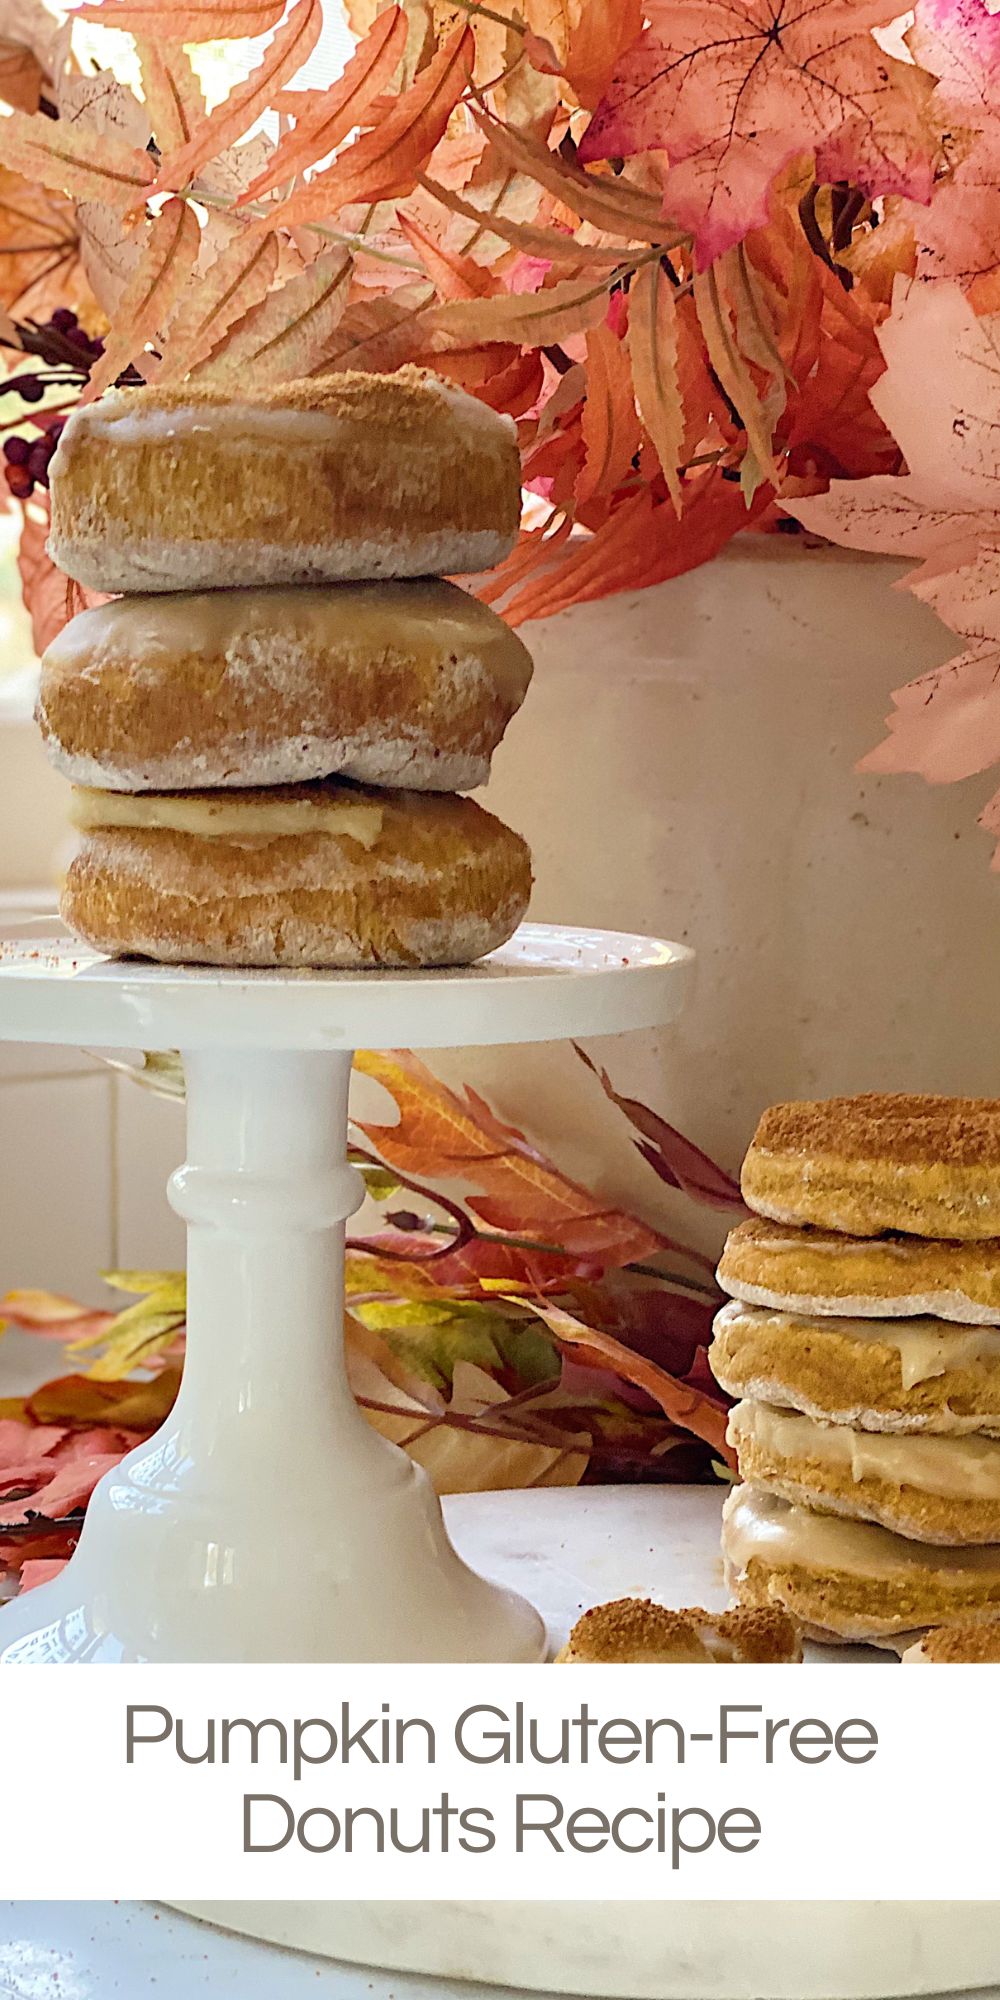 Pumpkin Gluten-Free Donuts are an incredible way to start your day. Nothing says cozy and homey like pumpkin, right? 